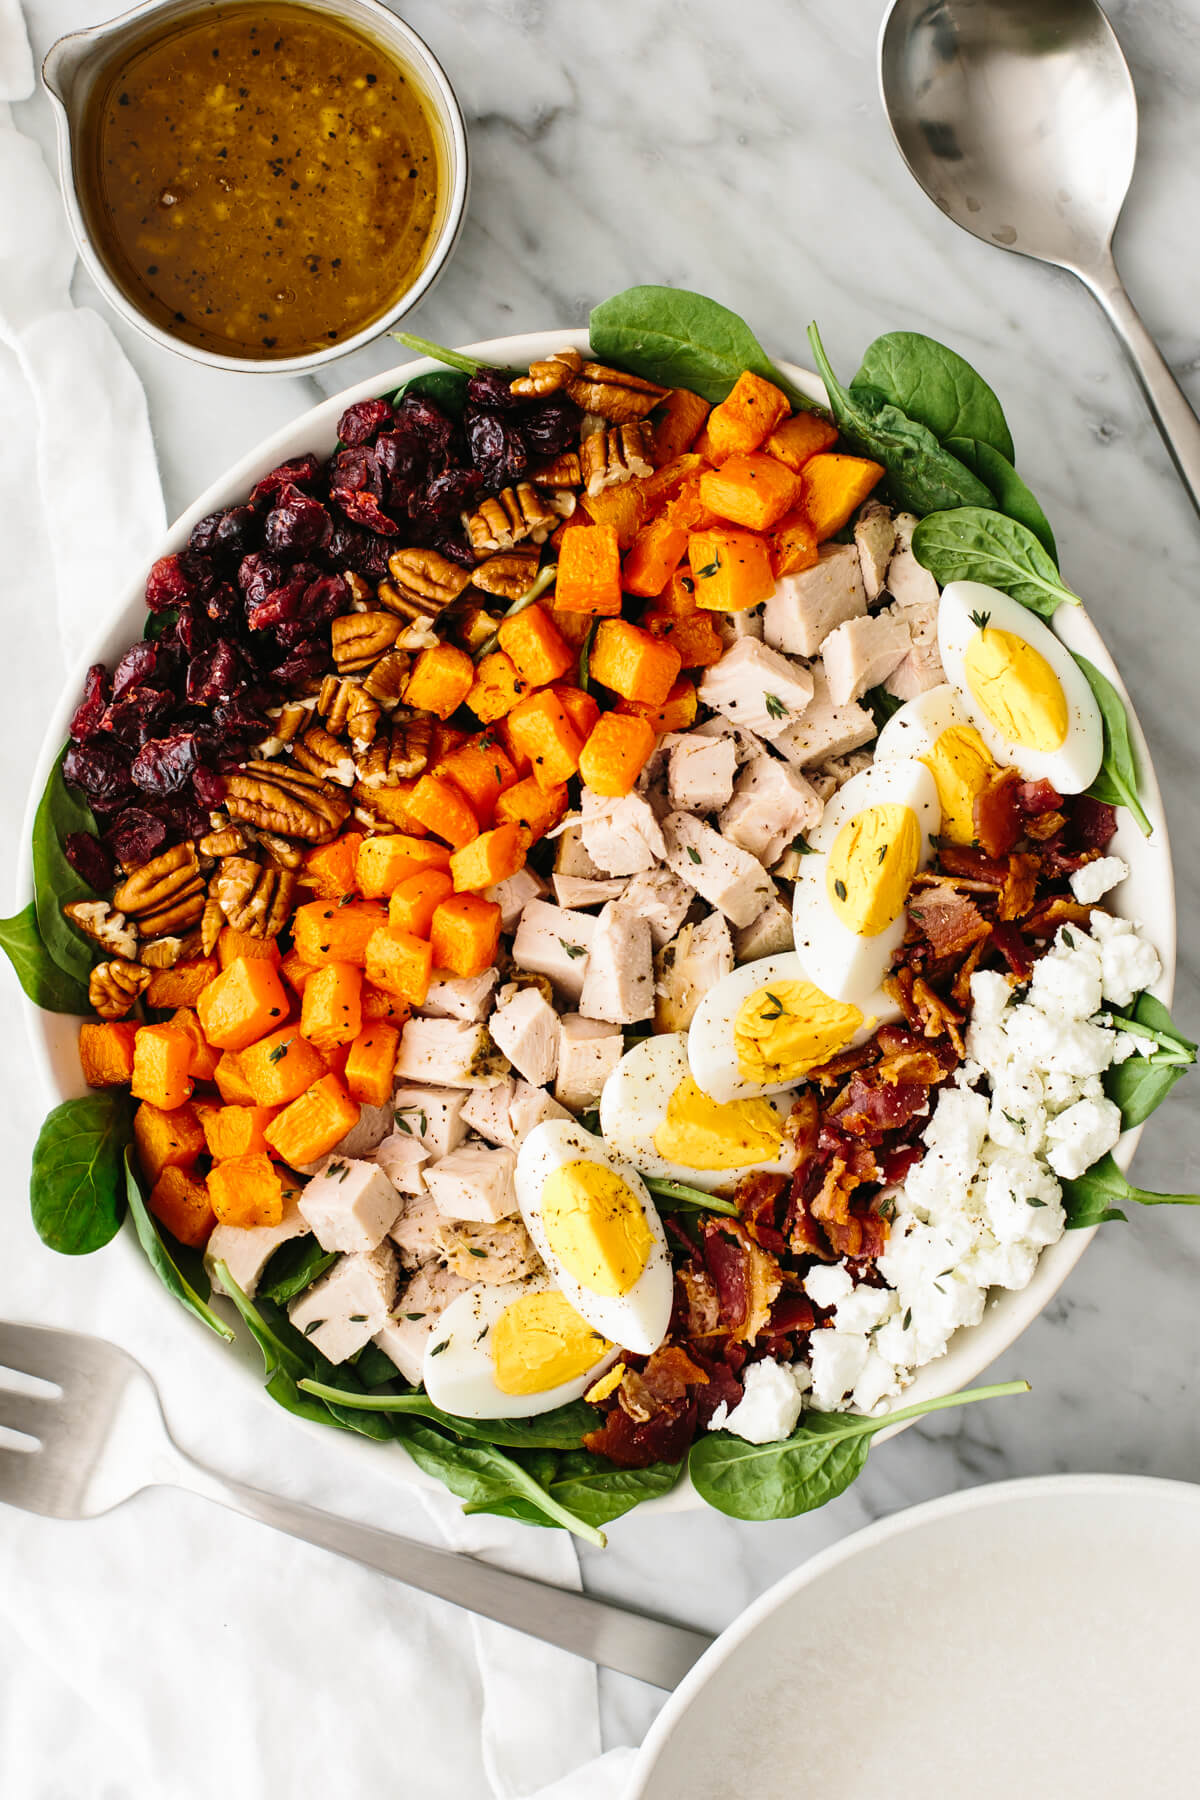 Turkey cobb salad in a large bowl on a table next to a spoon.